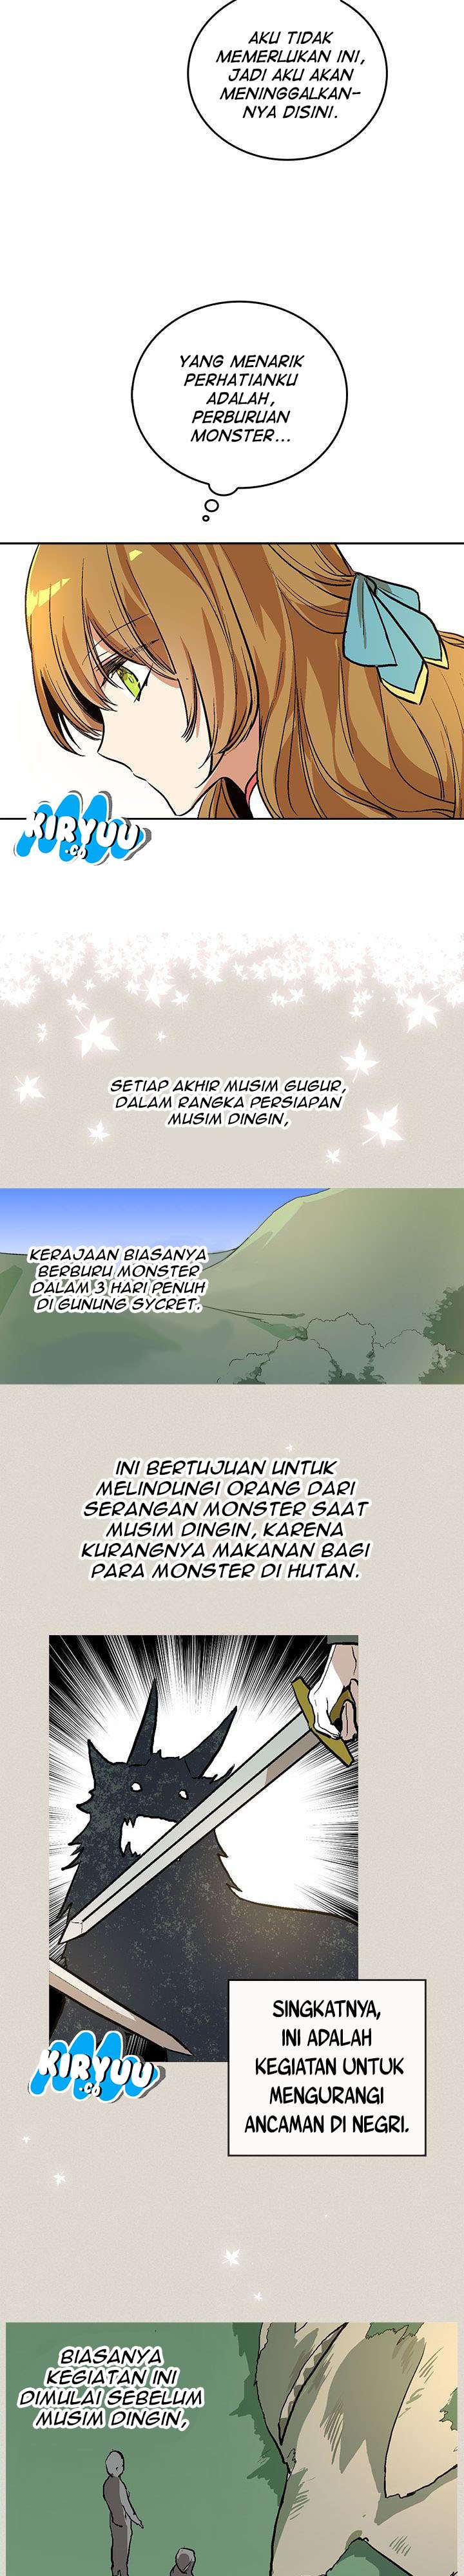 The Reason Why Raeliana Ended Up at the Duke’s Mansion Chapter 28 Bahasa Indonesia